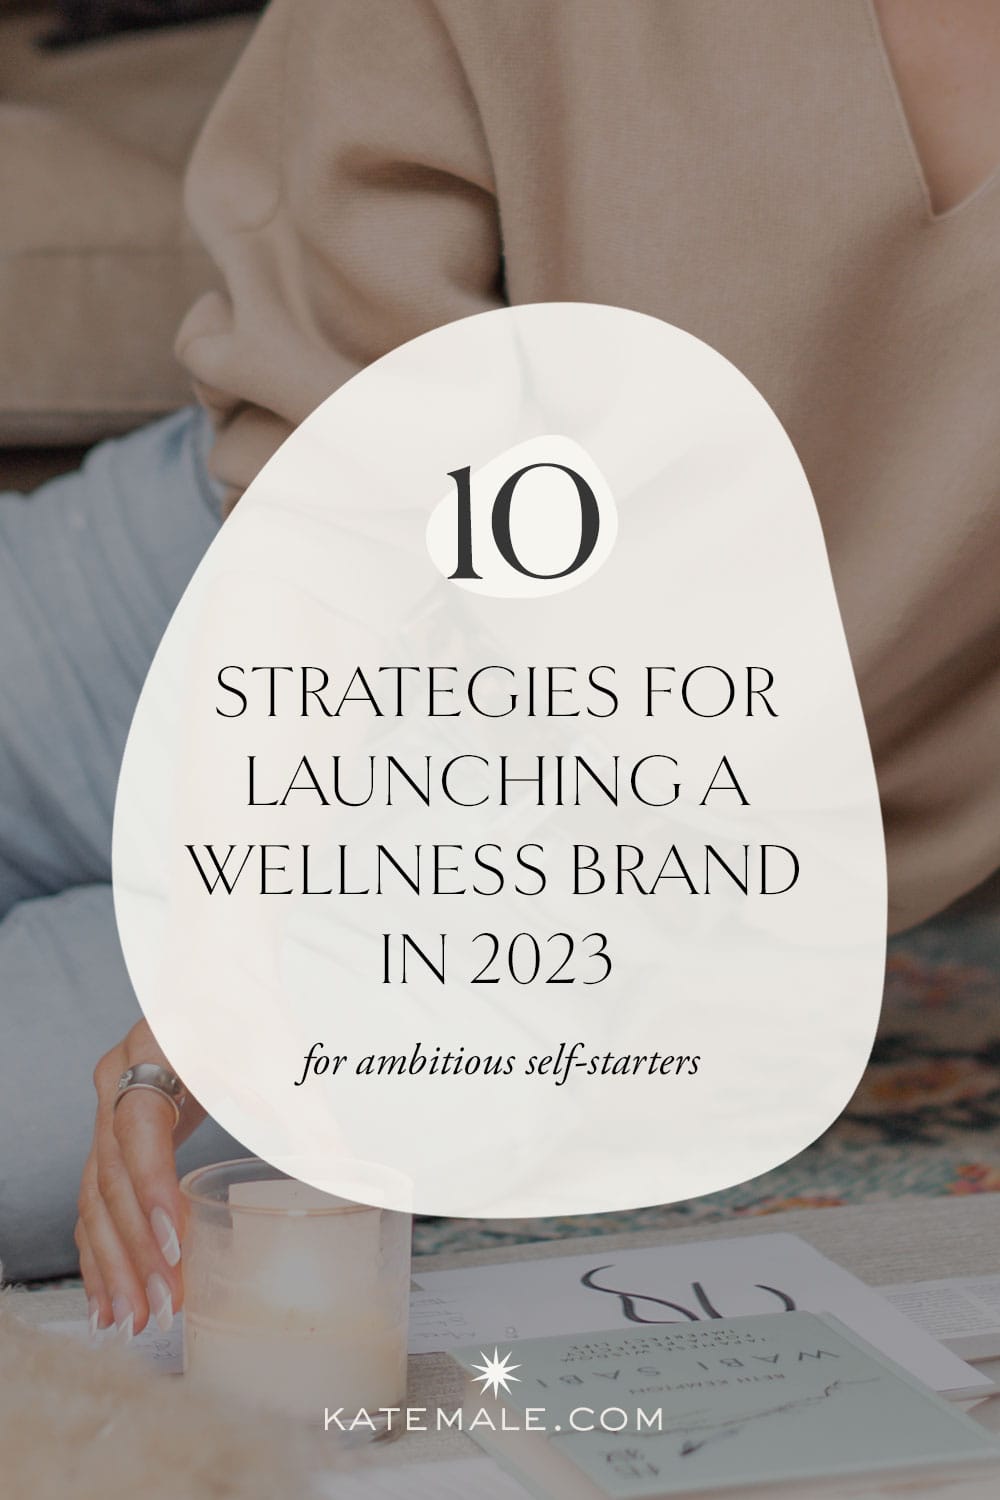 10 Strategies for Launching A Wellness Brand in 2023